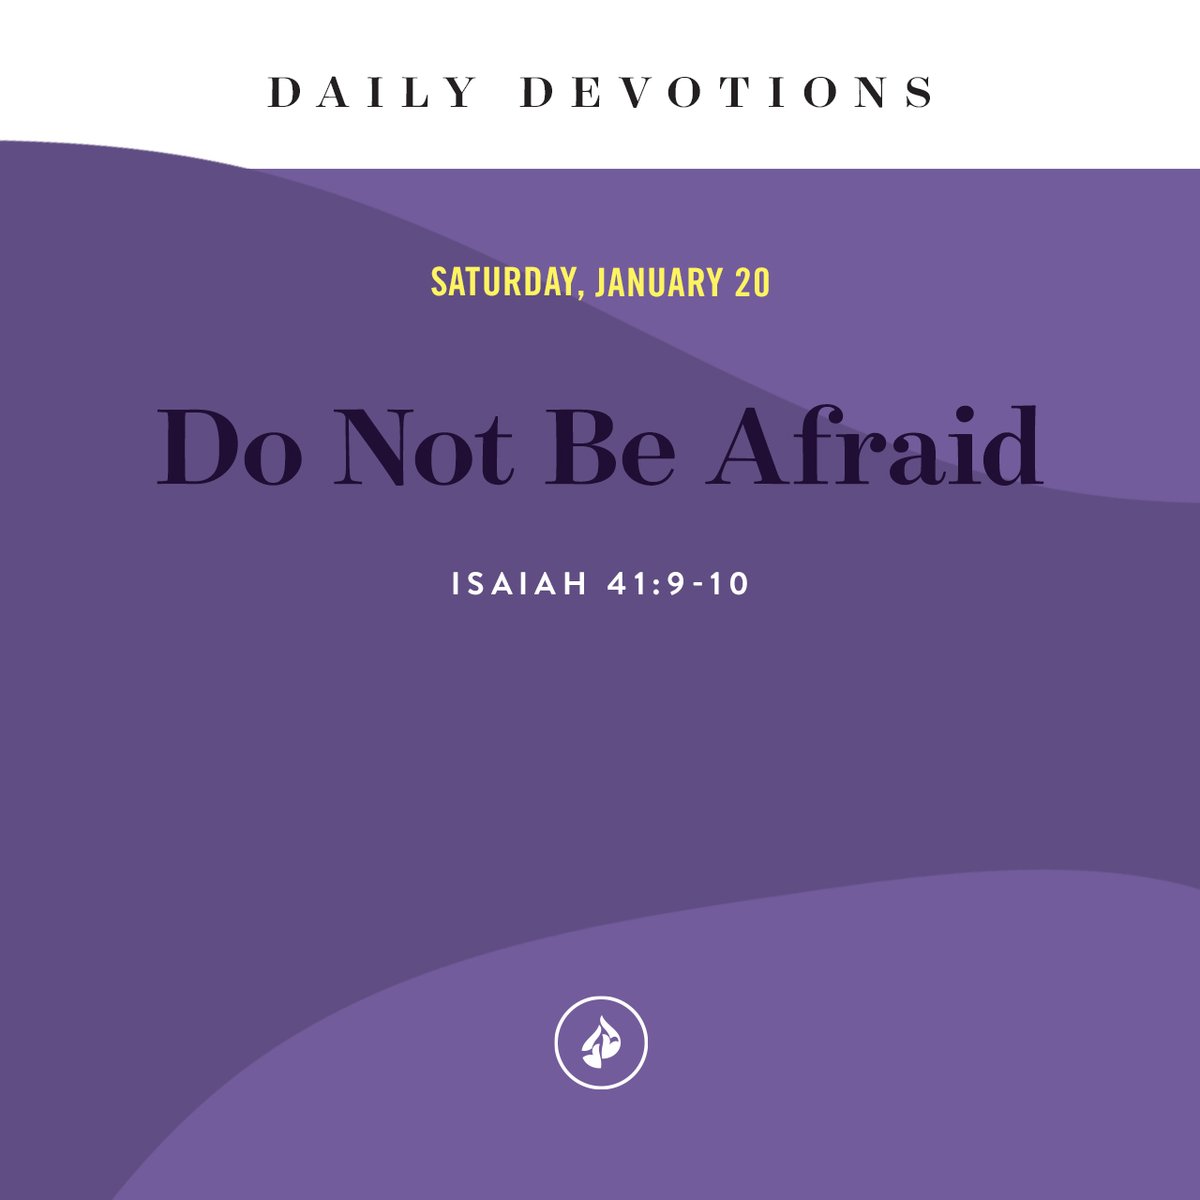 Our loving, faithful, and powerful God will never leave us, so we need not succumb to fear. #DailyDevo intouch.org/read/daily-dev…